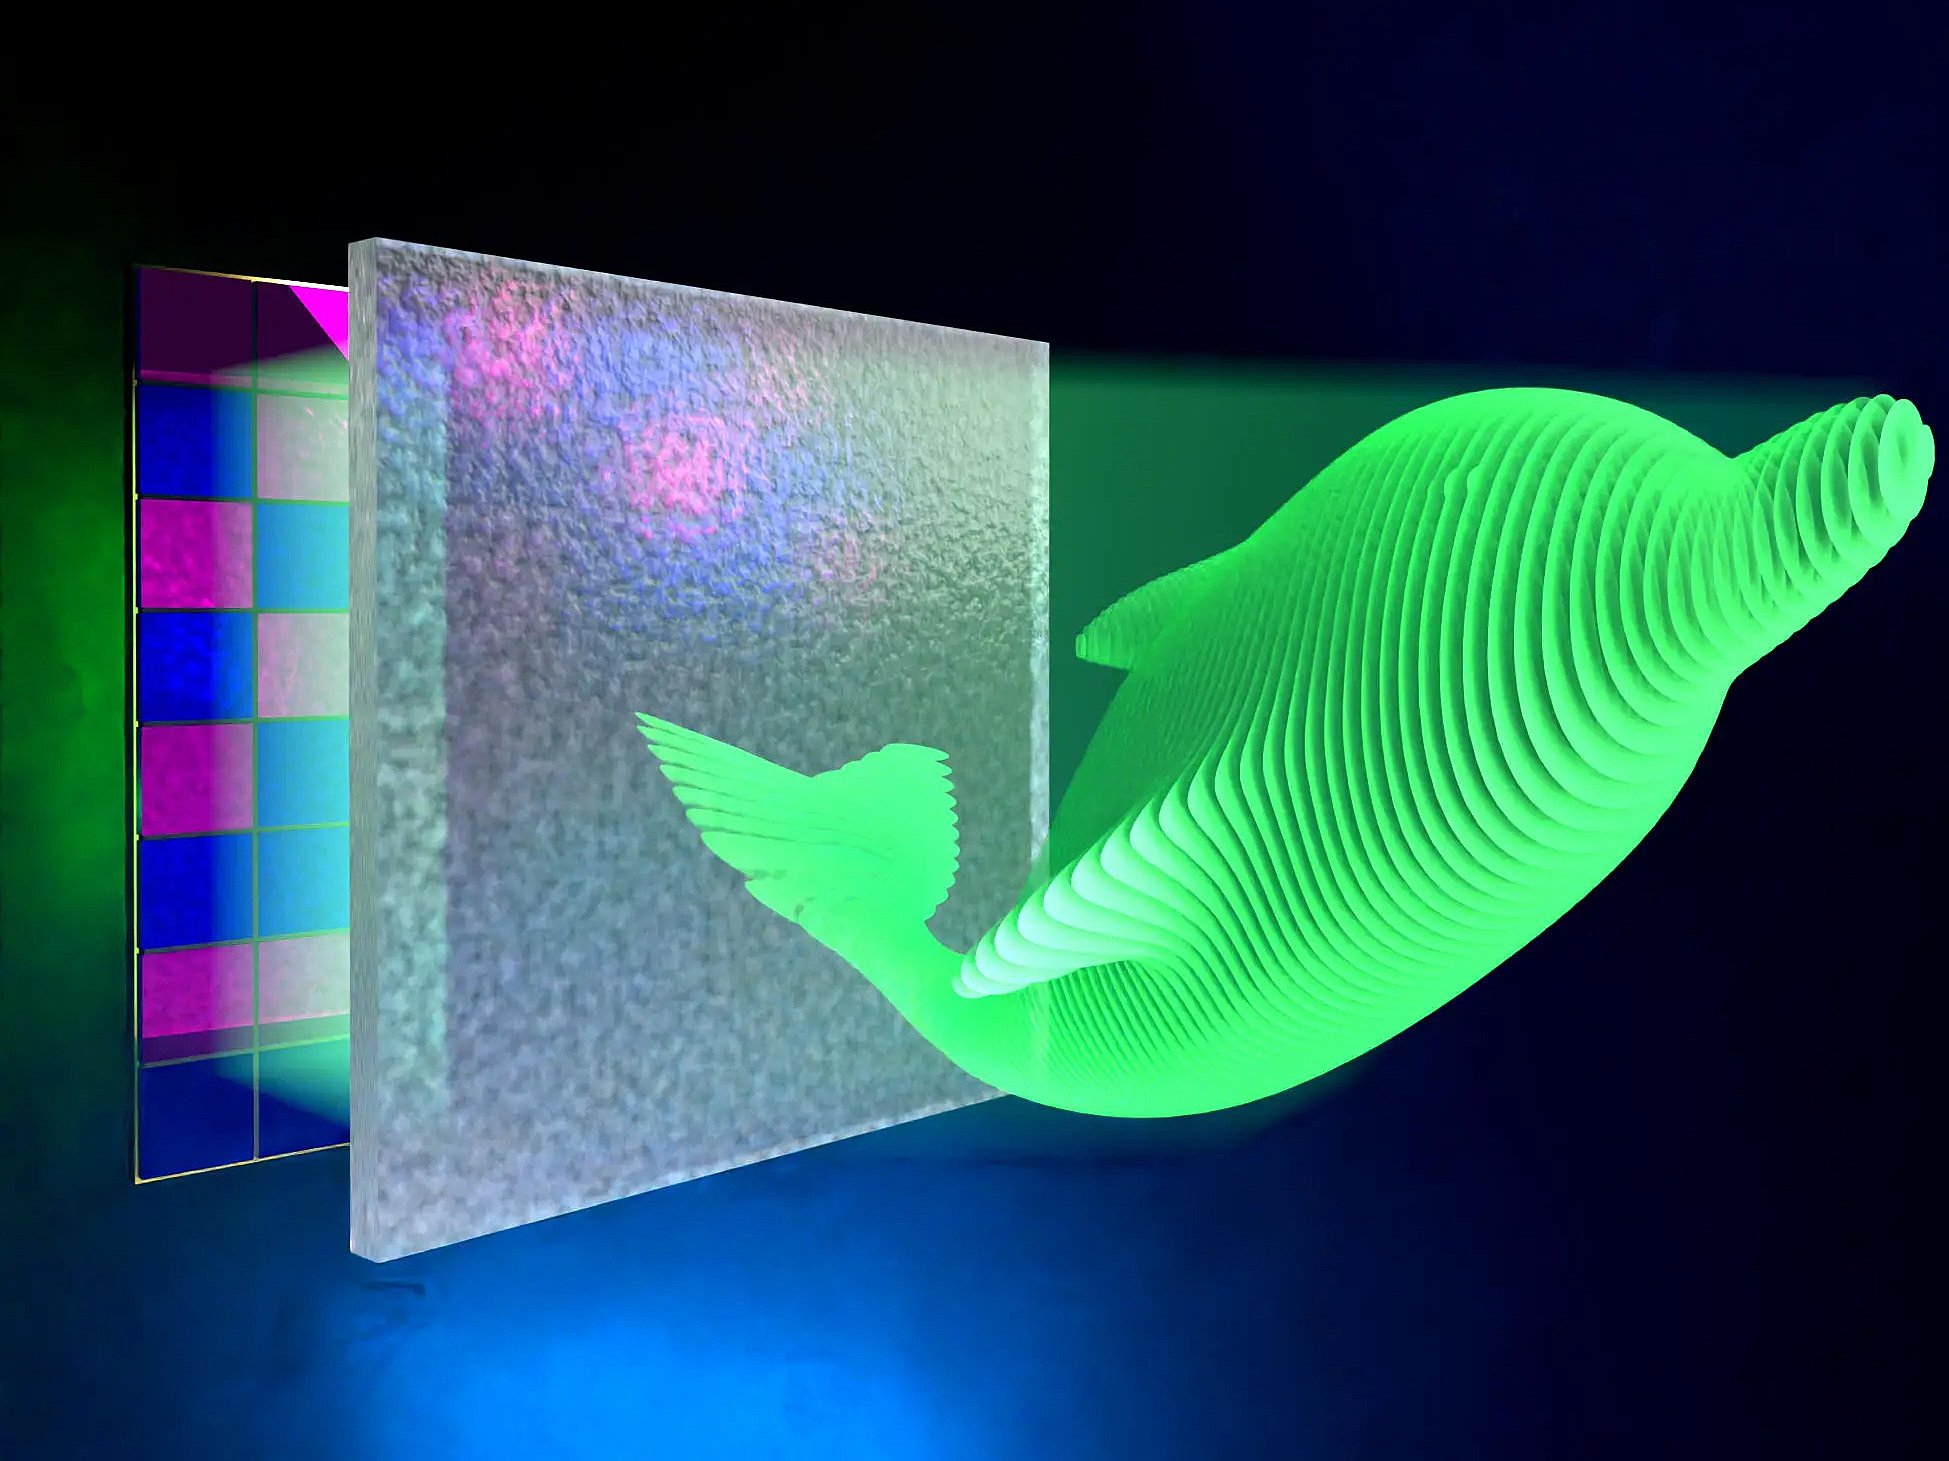 Using artificial intelligence to generate 3D holograms in real